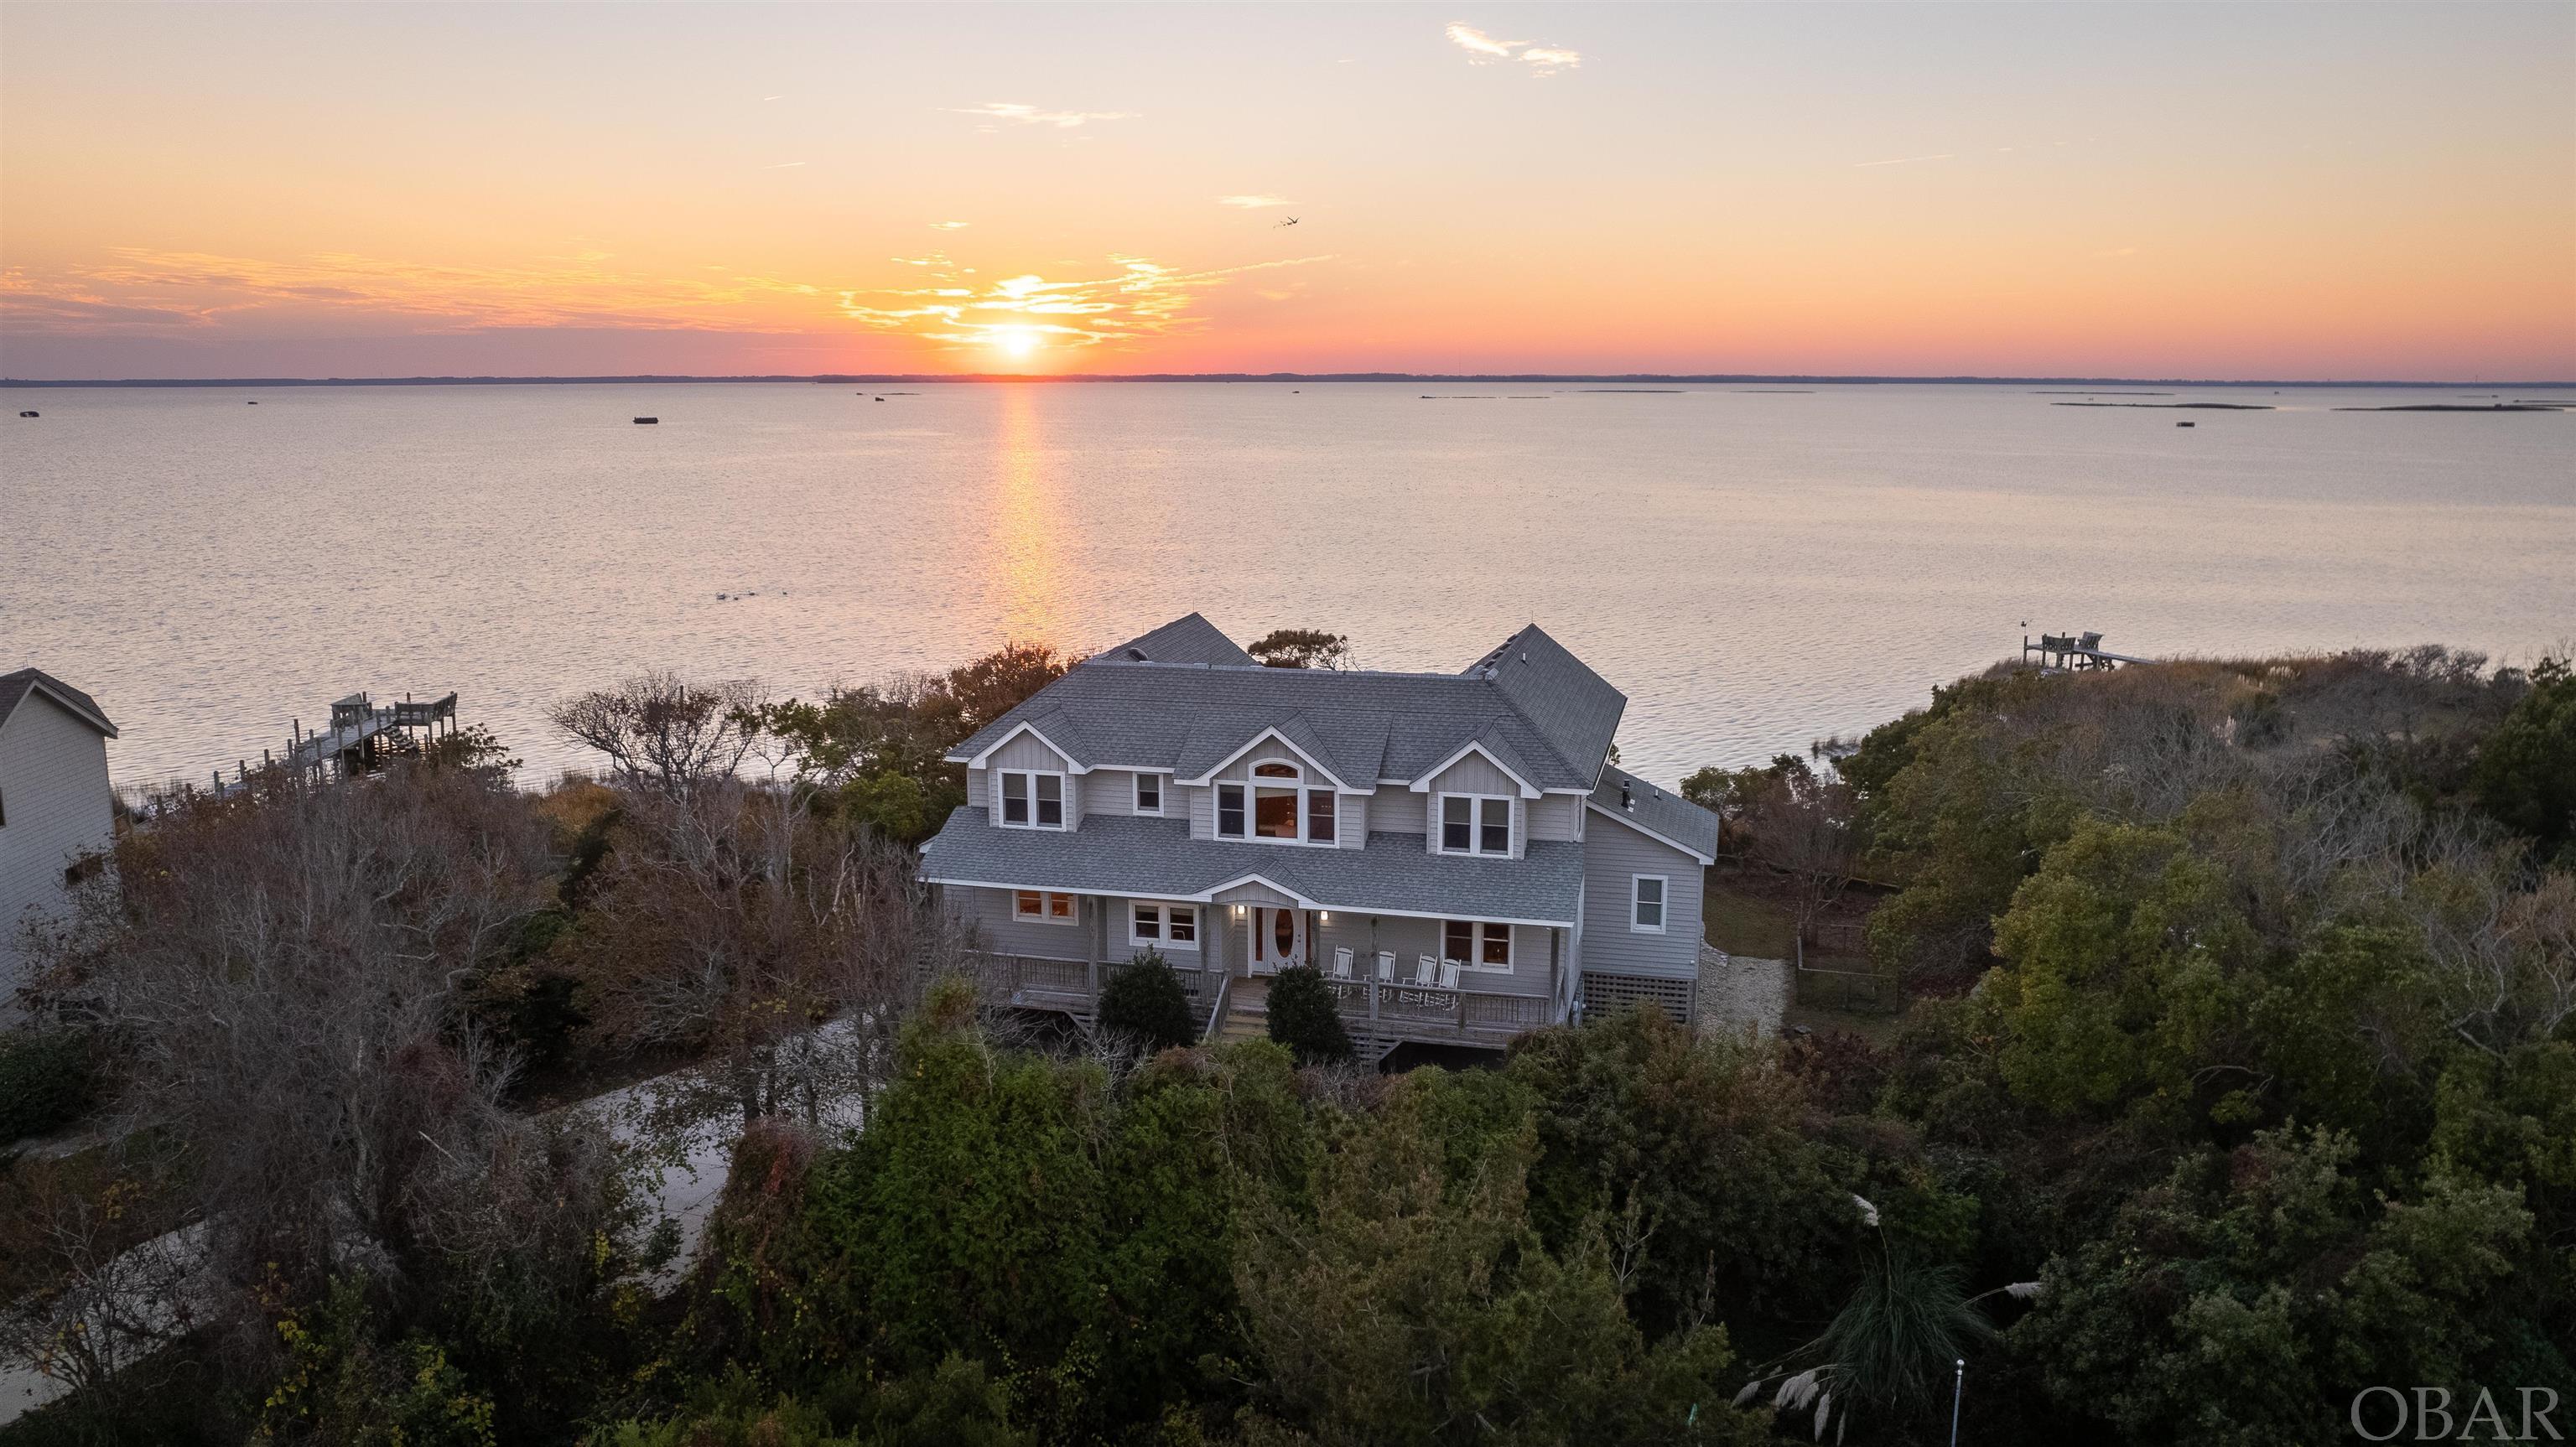 Enjoy coastal living at its finest with unobstructed water views over the Currituck Sound in this well appointed and ultra private Sanderling home.  This stunning custom home built by Ken Green checks all the 'waterfront dream home' boxes situated on over 1/2 acre at the end of a quiet cul-de-sac with a private pier, kayak launch and endless sunsets on the expansive sun and covered decks.  As you walk into the foyer you are greeted by a wall of windows capturing endless water views from every angle.  The main level boasts a gourmet kitchen with a large breakfast bar, Hi-Macs solid surface countertops, dual sinks, built-in cooktop and double ovens, and a dining area and great room offering plenty of space to entertain all while overlooking the gorgeous sound vistas.  You will also find a large private office, the perfect space to work from home and also permitted for a 6th Bedroom, a powder room, laundry room, sunset viewing sunroom (with separate mini split), and a 1st floor King primary bedroom with more sound views. Upstairs boasts 4 additional bedroom suites with stunning picture windows and water views, all with private en suite baths, a loft style den/sitting area, a 2nd stacked full size washer/dryer, and a sun deck to take in even more sound views.  Built with timeless details and amenities including an Elevator, Central Vac, surround sound speaker system, solid interior doors, hardwood flooring, gas fireplace, Juniper tongue and groove walls throughout (even more stunning in person!), and cedar lined closets, this home is both comfortable and grande and makes the perfect place to call your Outer Banks home.  The ground level offers tons of storage options inside and outside, as well as covered carport space for 3 vehicles.  Outside you will enjoy ample side and backyard space for outdoor entertaining, beautiful landscaping with irrigation including fig trees by the front entrance, a garden area and an outside shower.  The private pier has brand new light and rope and is ideal for kayaking, crabbing, fishing, swimming and sunset watching!  The Sanderling community in Duck offers a Soundfront community pool, racquet / health club and tennis courts, and boasts about a mile of uncrowded beaches, and serene nature paths.  All just a short distance north of the quaint town of Duck known for its incredible shopping, waterfront boardwalk and restaurants!